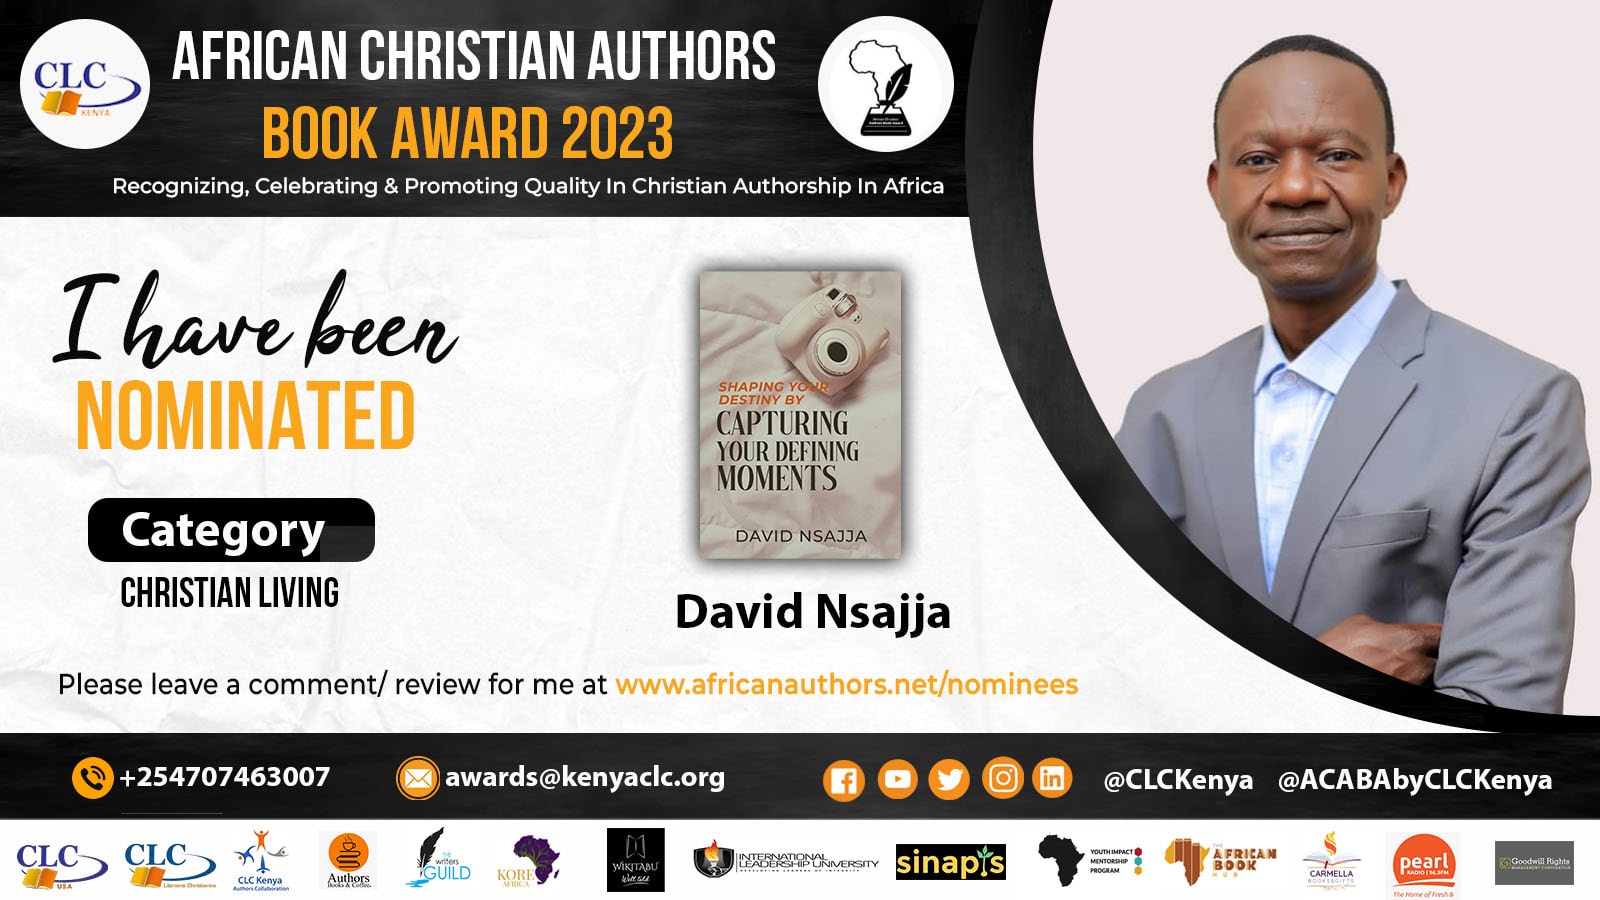 David Calls On Individuals To Seize Their Defining Moments